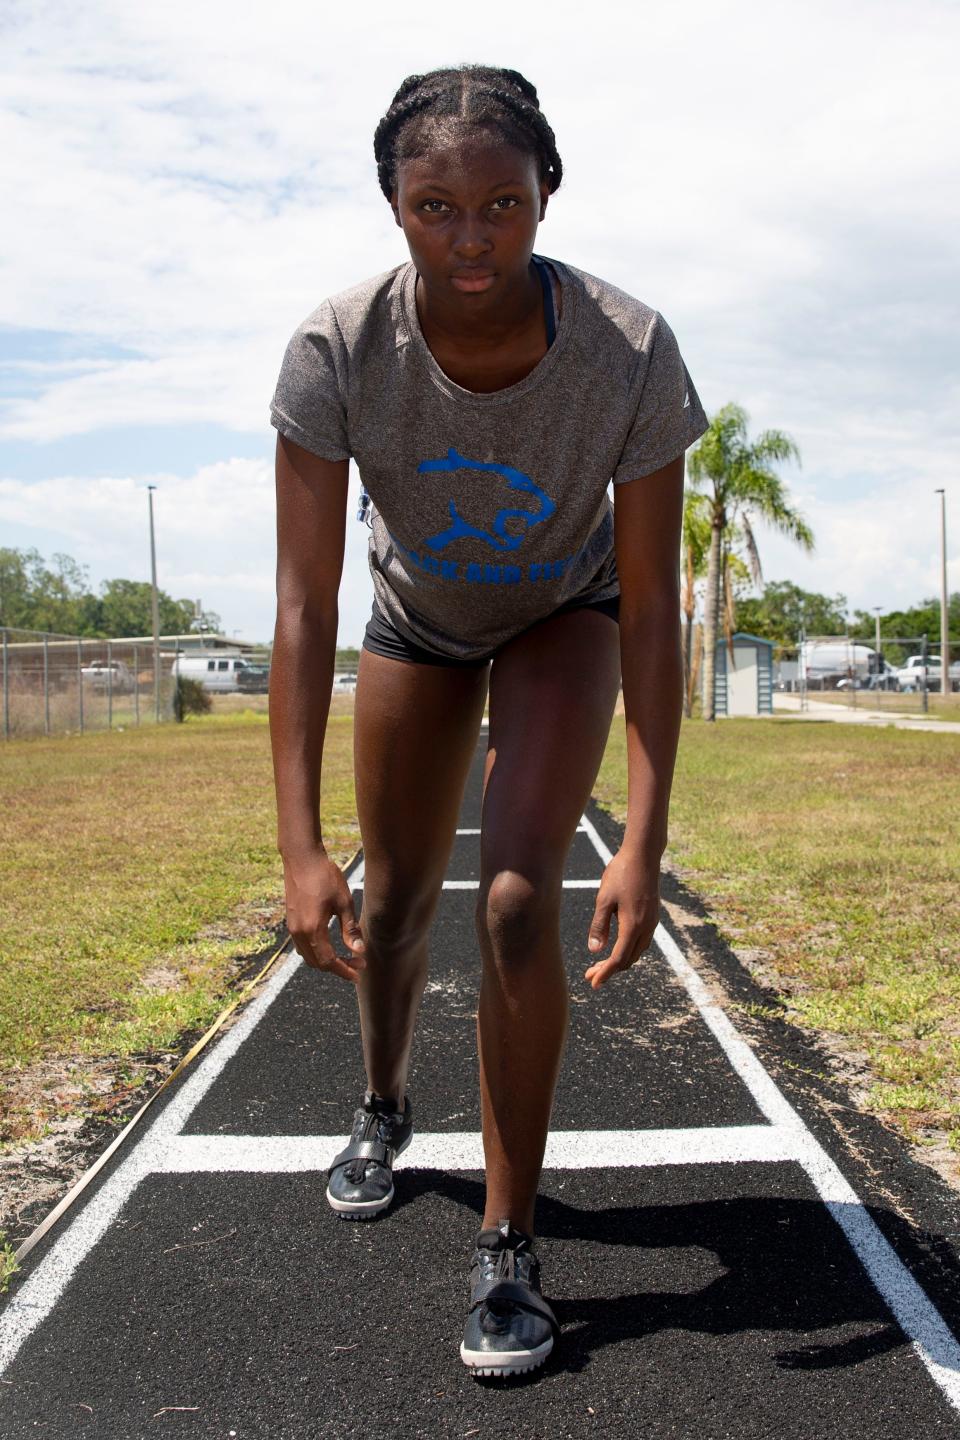 Shamoya Clemetson, a sophomore track and field athlete at Barron Collier High School in Naples, Fla.